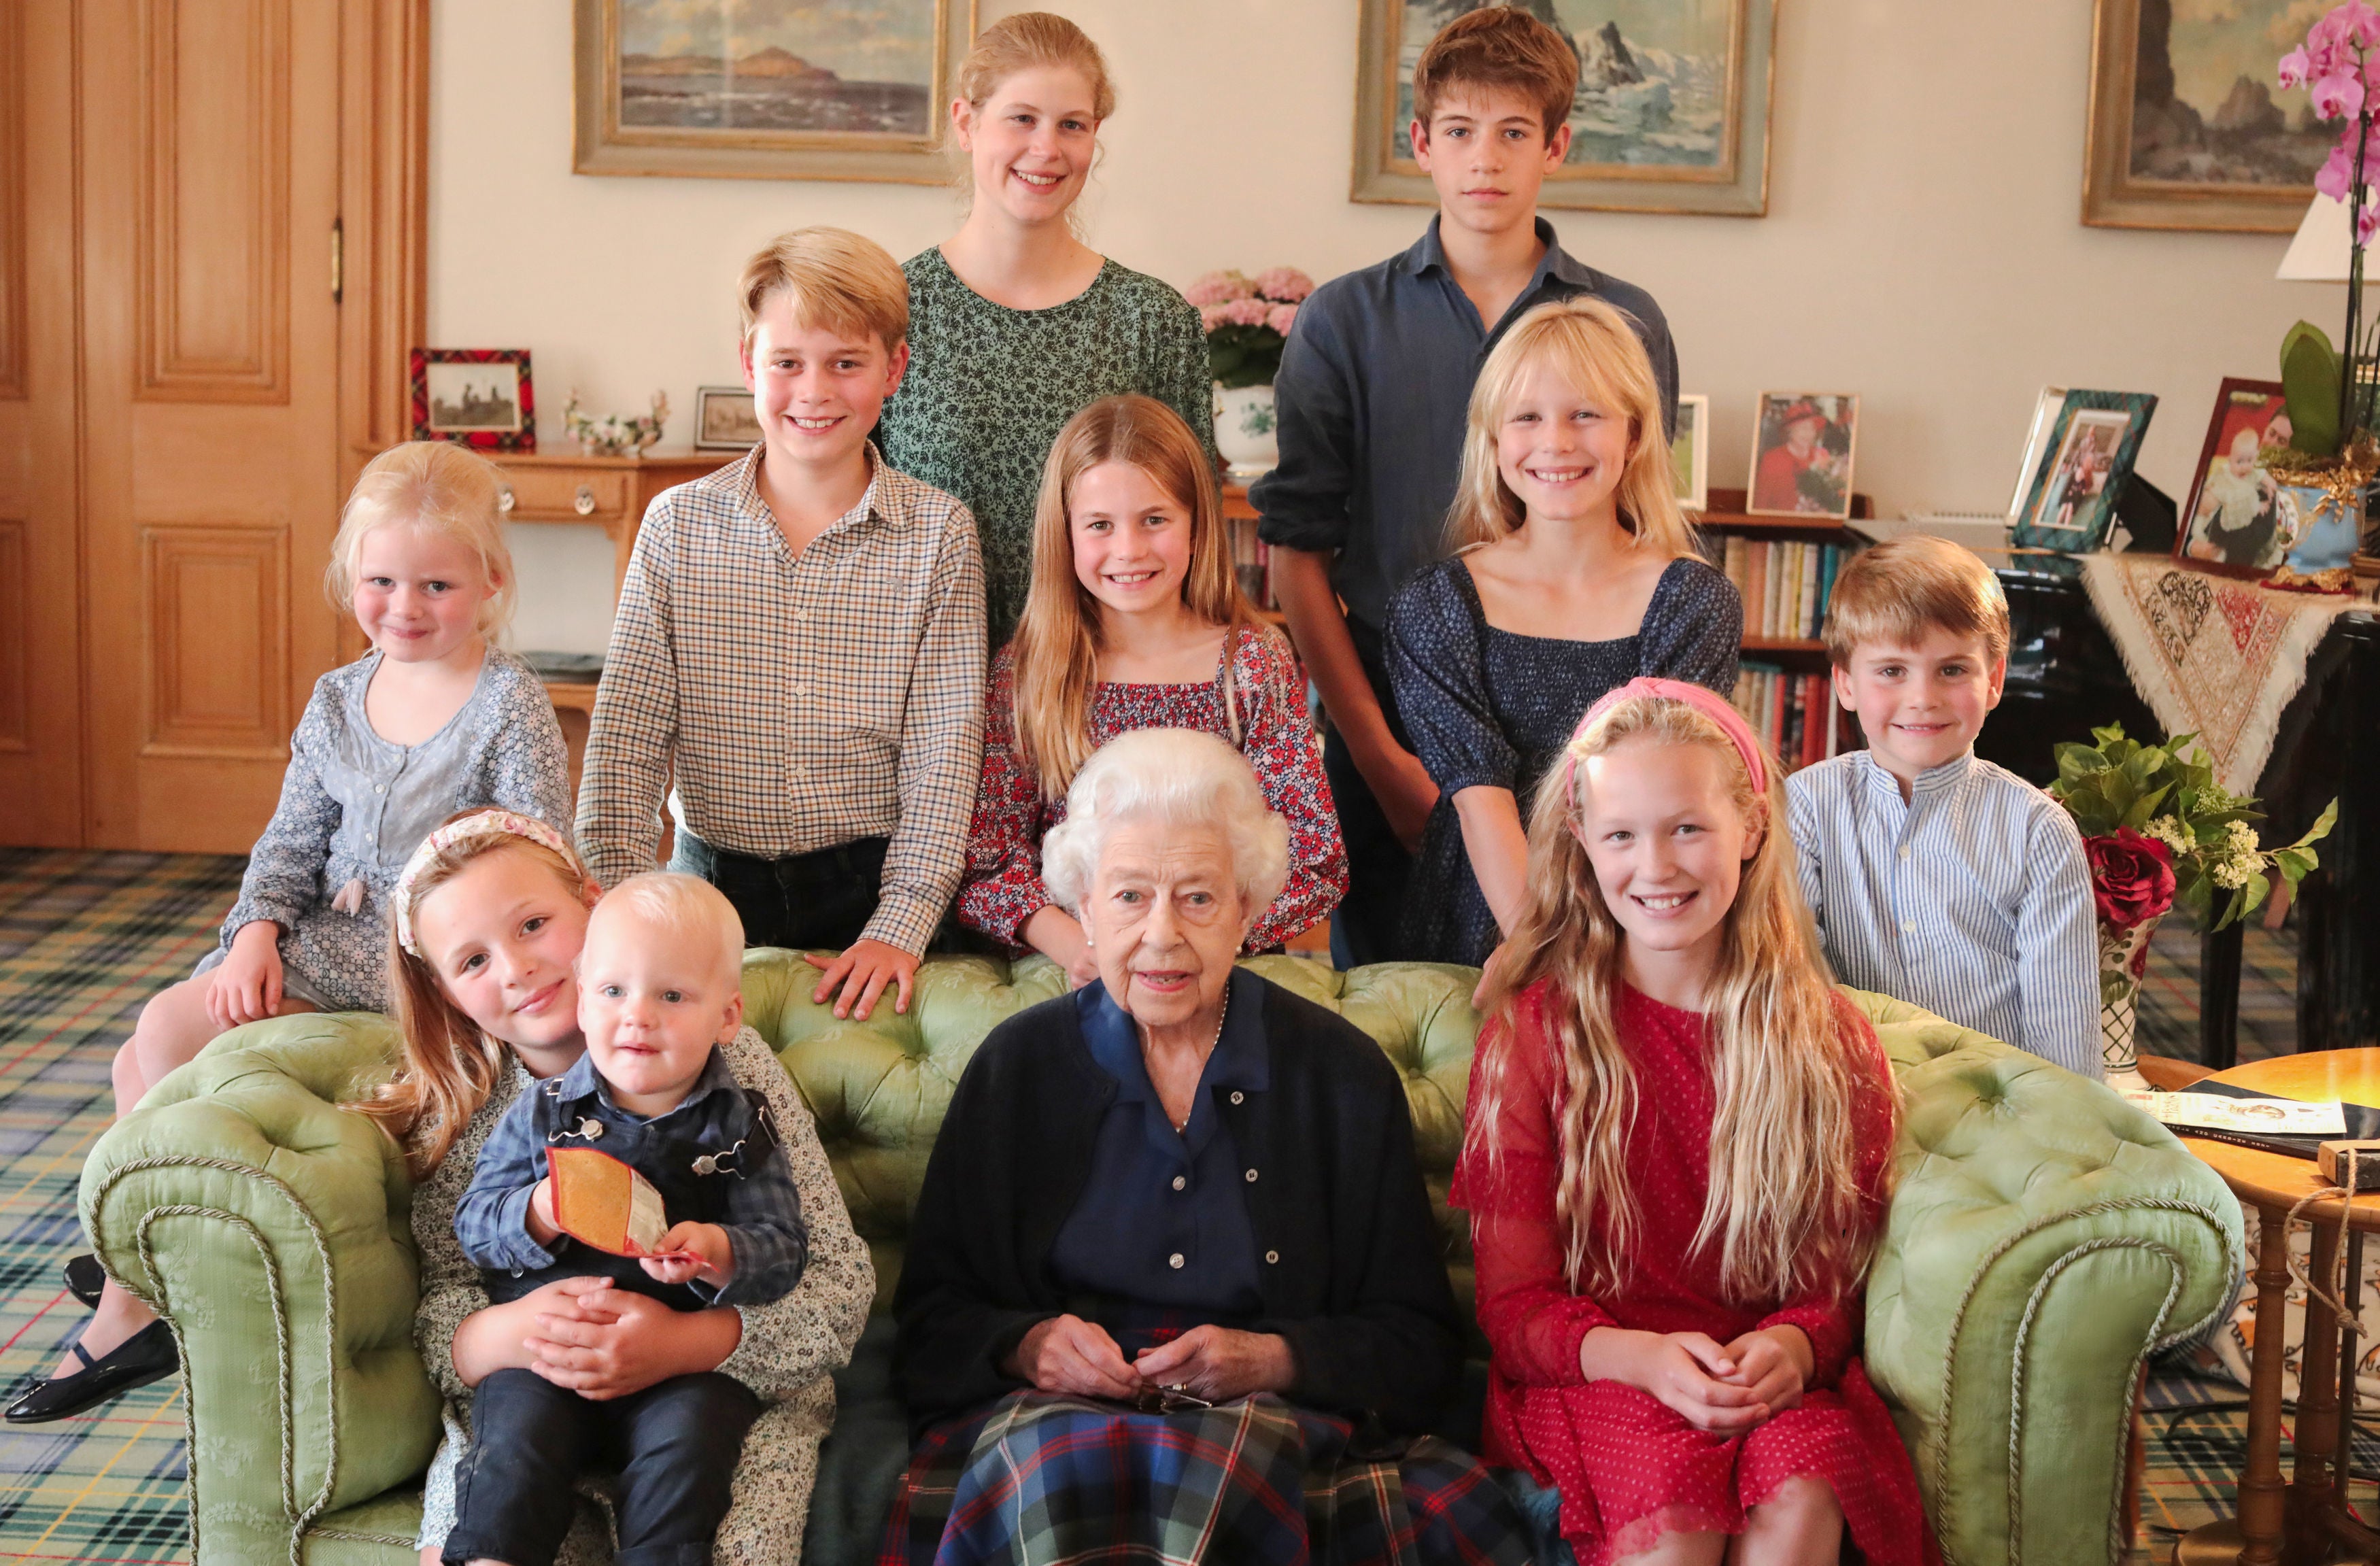 The photograph was taken by the Princess of Wales at Balmoral last summer and shows the Queen with some of her grandchildren and great grandchildren (back row, left to right) Lady Louise Mountbatten-Windsor and James, Earl of Wessex, (middle row, left to right) Lena Tindall, Prince George, Princess Charlotte, Isla Phillips, Prince Louis, and (front row, left to right) Mia Tindall holding Lucas Tindall, Queen Elizabeth II and Savannah Phillips.